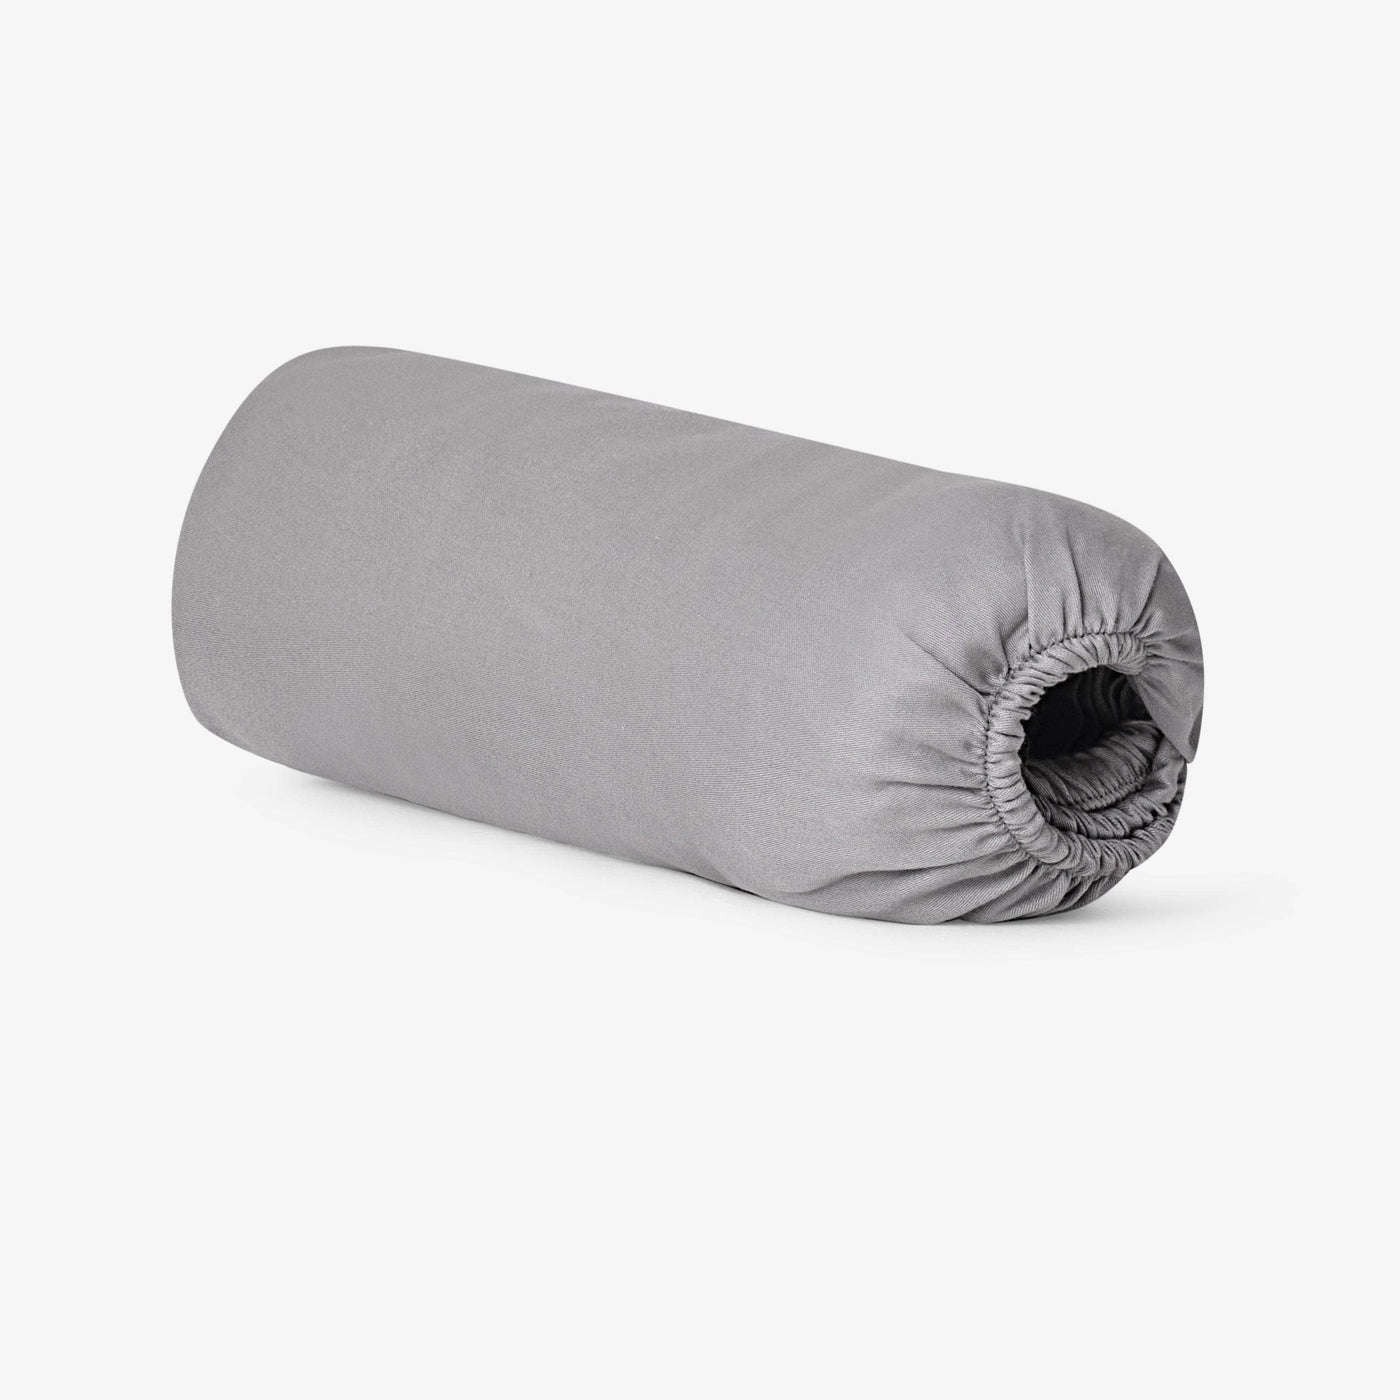 Charles 100% Turkish Cotton Sateen 210 TC Fitted Sheet, Grey, Super King Size Bed Sheets sazy.com